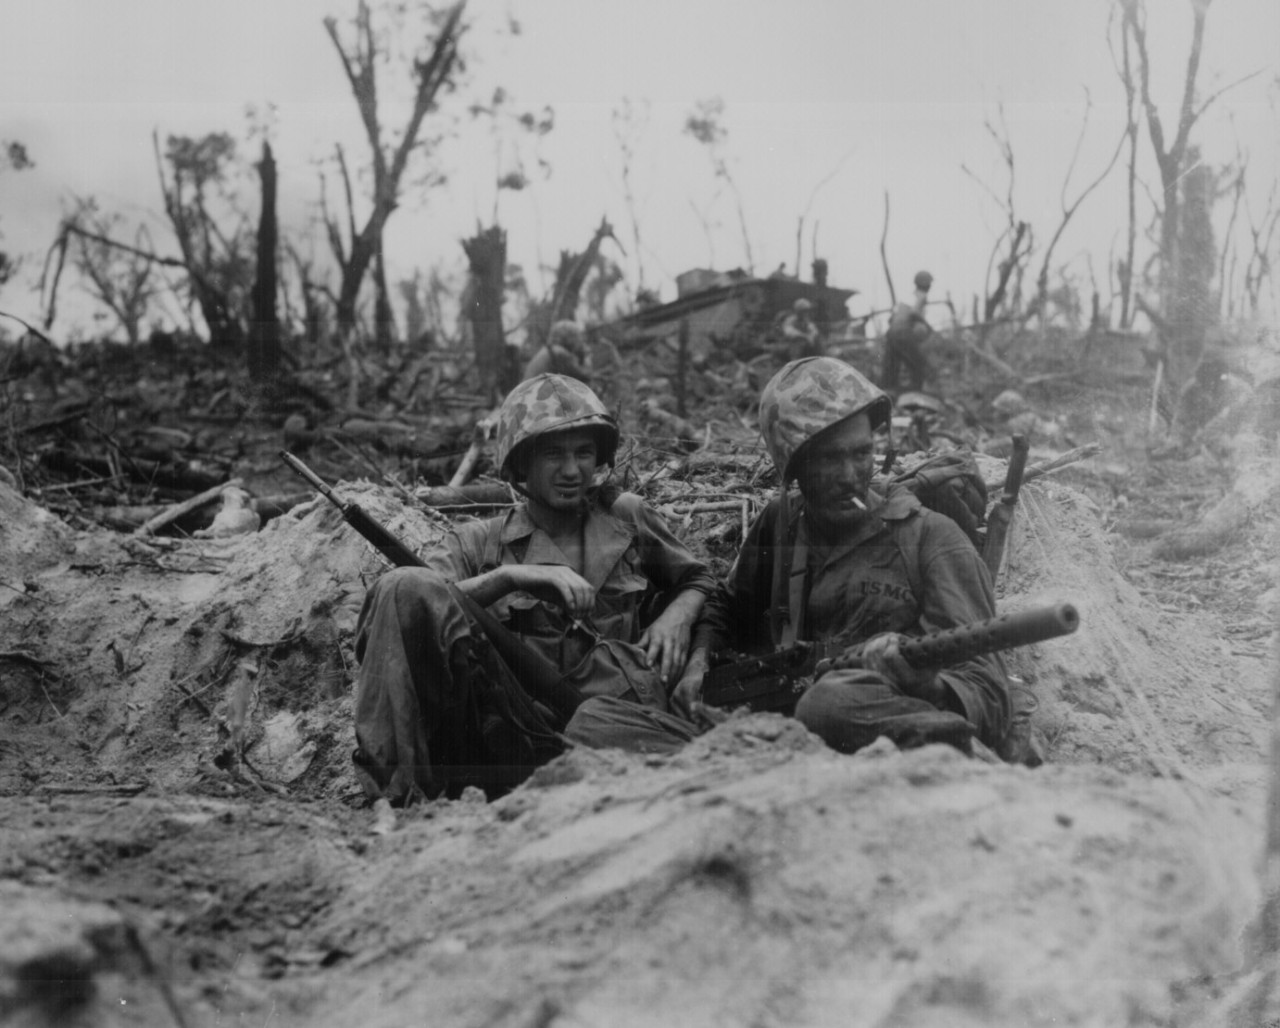 <p>Marines take time out for a cigarette during the heavy fighting on Peleliu, September 1944 (127-N-97628).</p>
